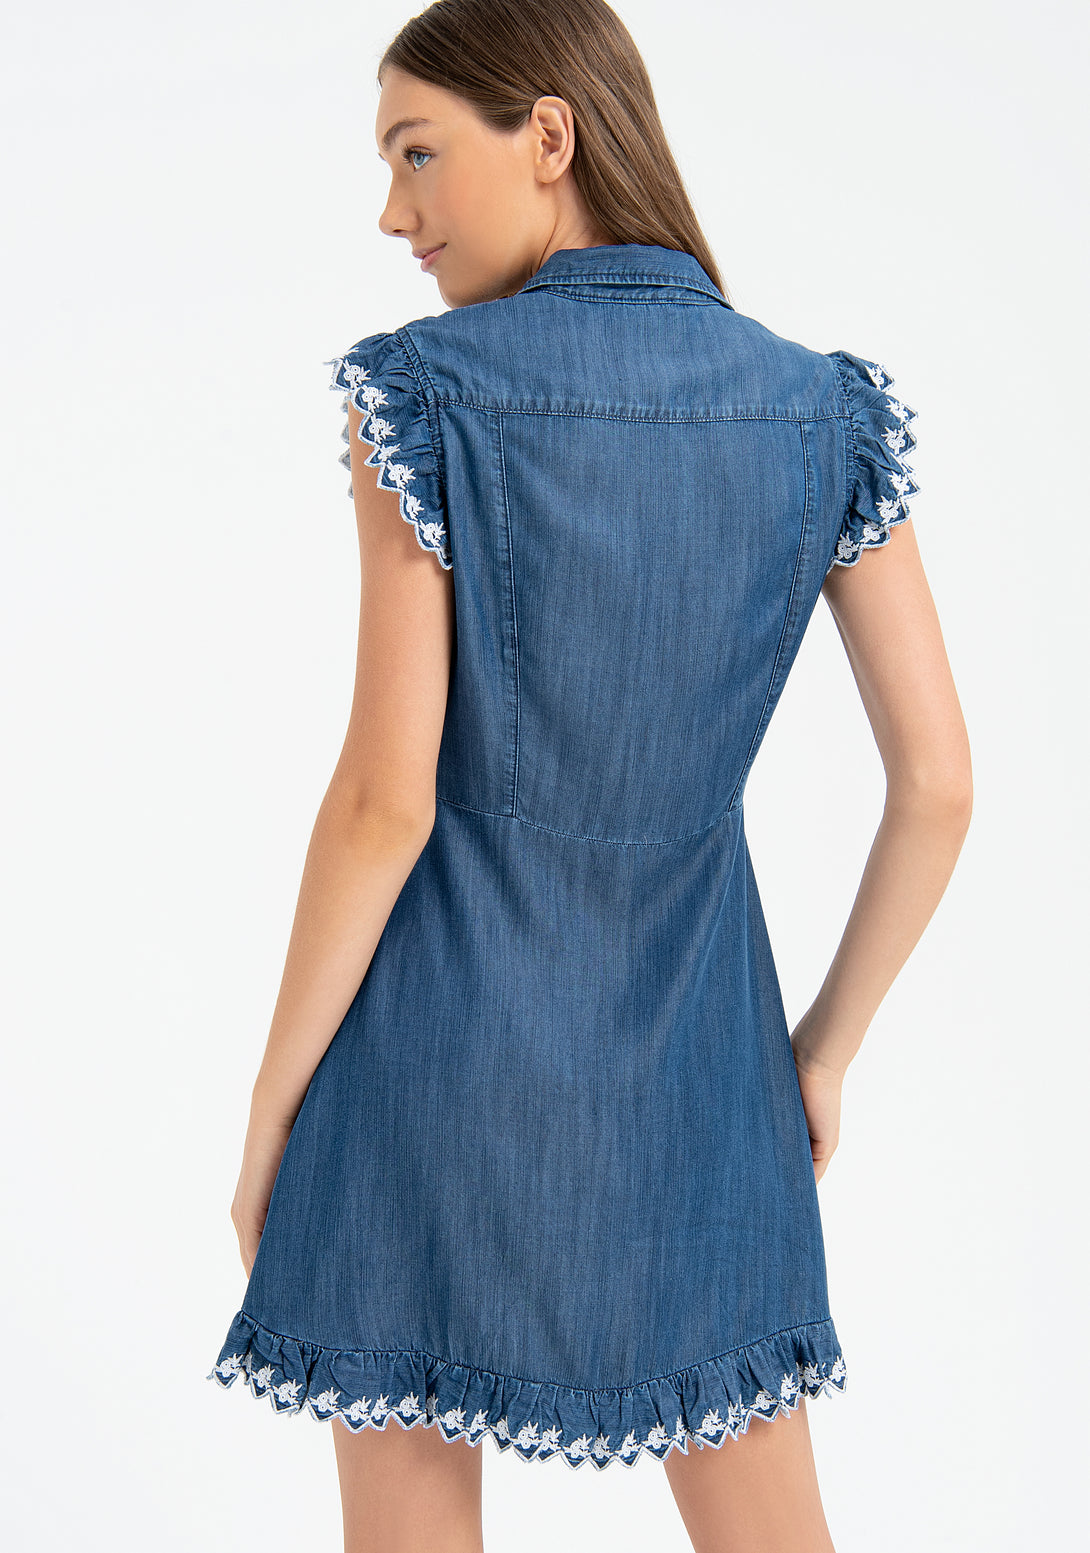 Chemisier dress, short, made in chambray fabric